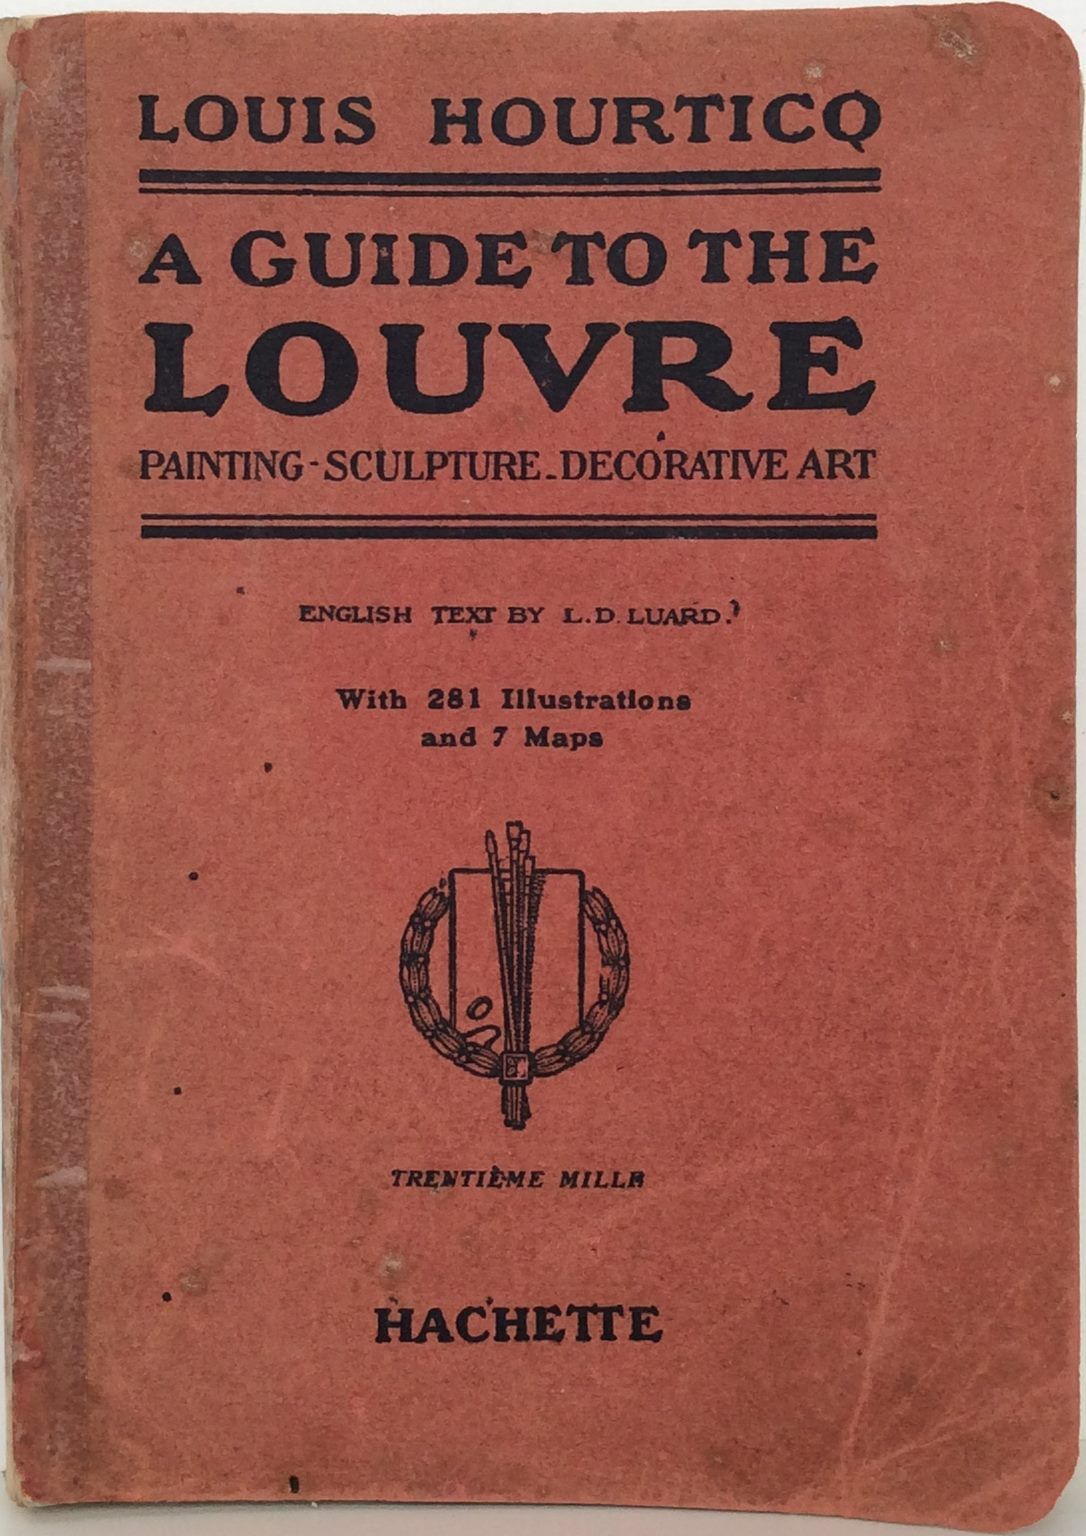 A GUIDE TO THE LOUVRE: Painting, Sculpture, Decorative Art